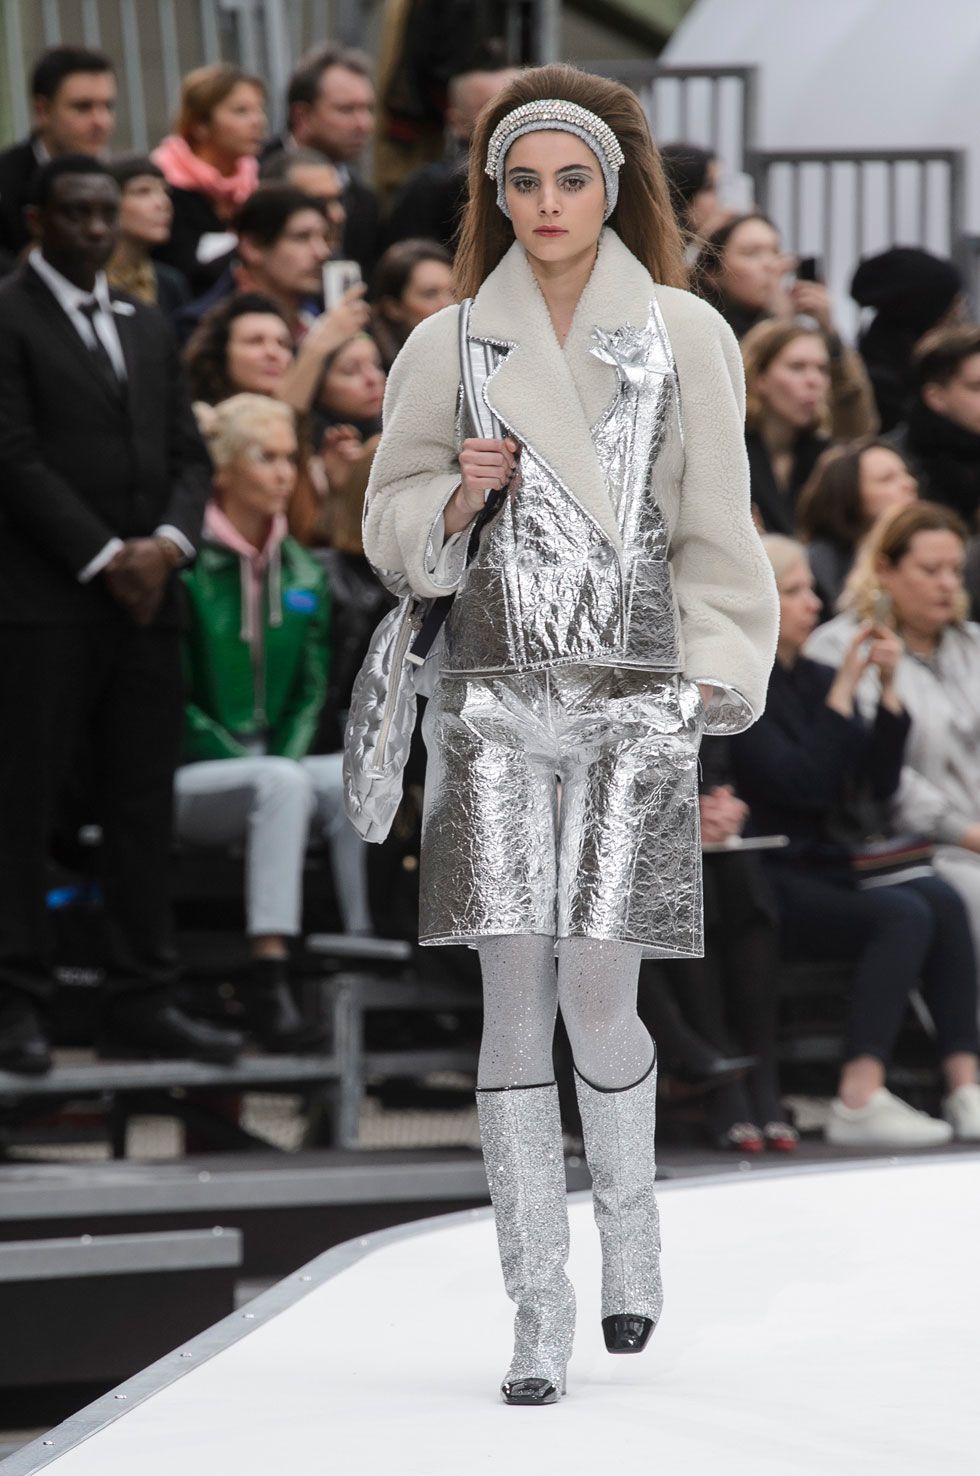 96 Looks From Chanel Fall 2017 PFW Show - Chanel Runway at Paris